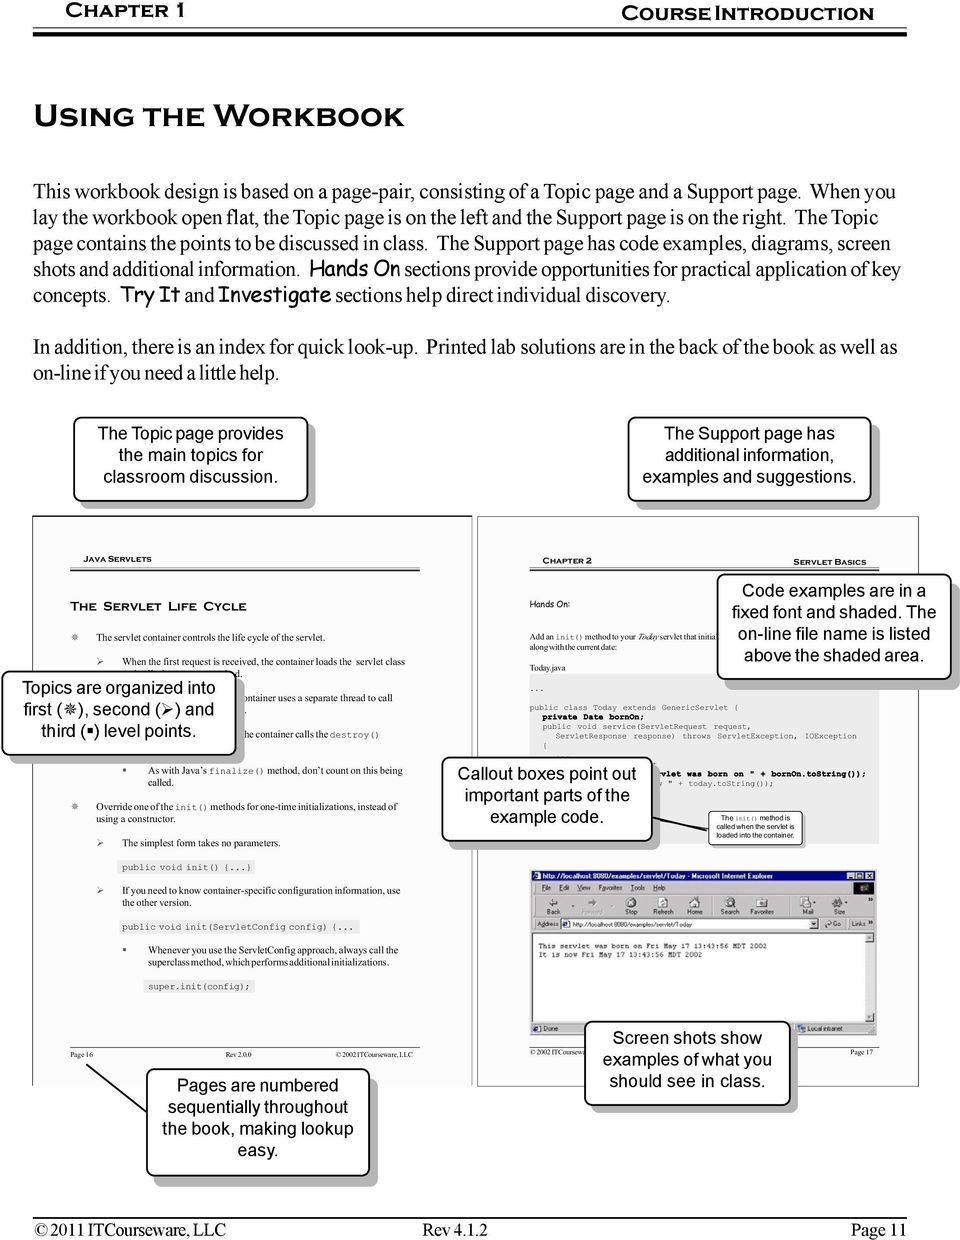 The Support page has code examples, diagrams, screen shots and additional information. Hands On sections provide opportunities for practical application of key concepts.